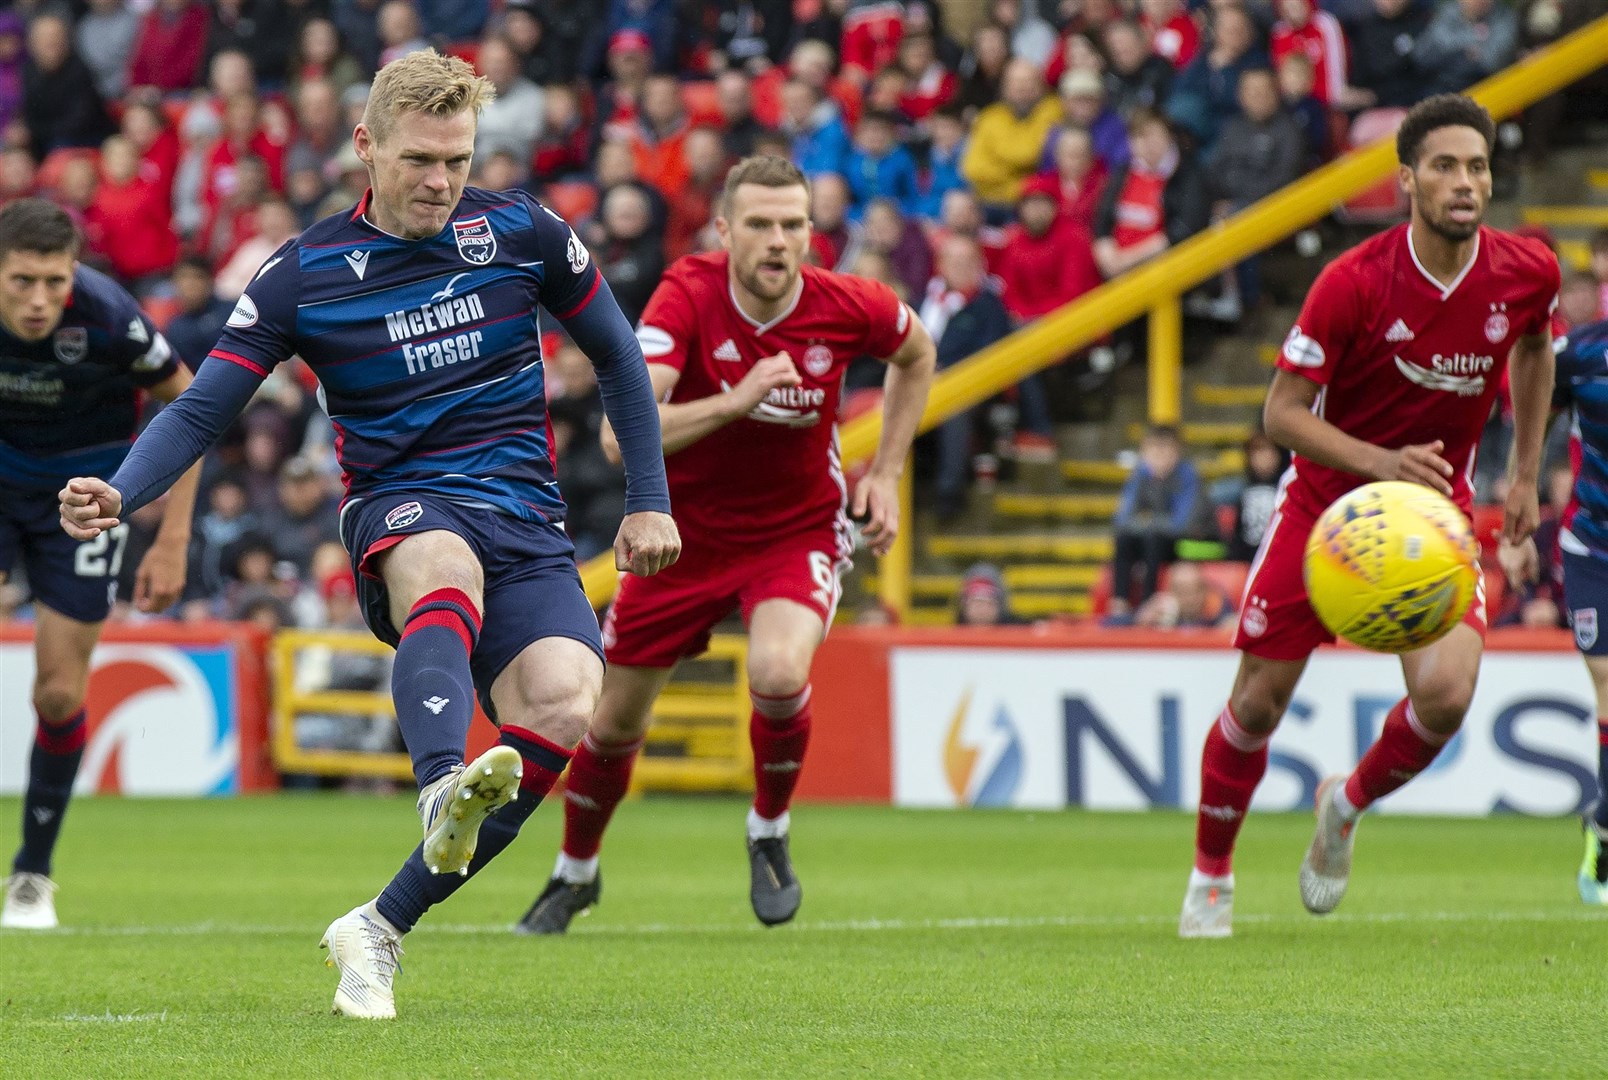 Picture - Ken Macpherson, Inverness. Aberdeen(3) v Ross County(0). 31.08.19. Ross County's Billy McKay sees his penalty-kick hit the Aberdeen post.